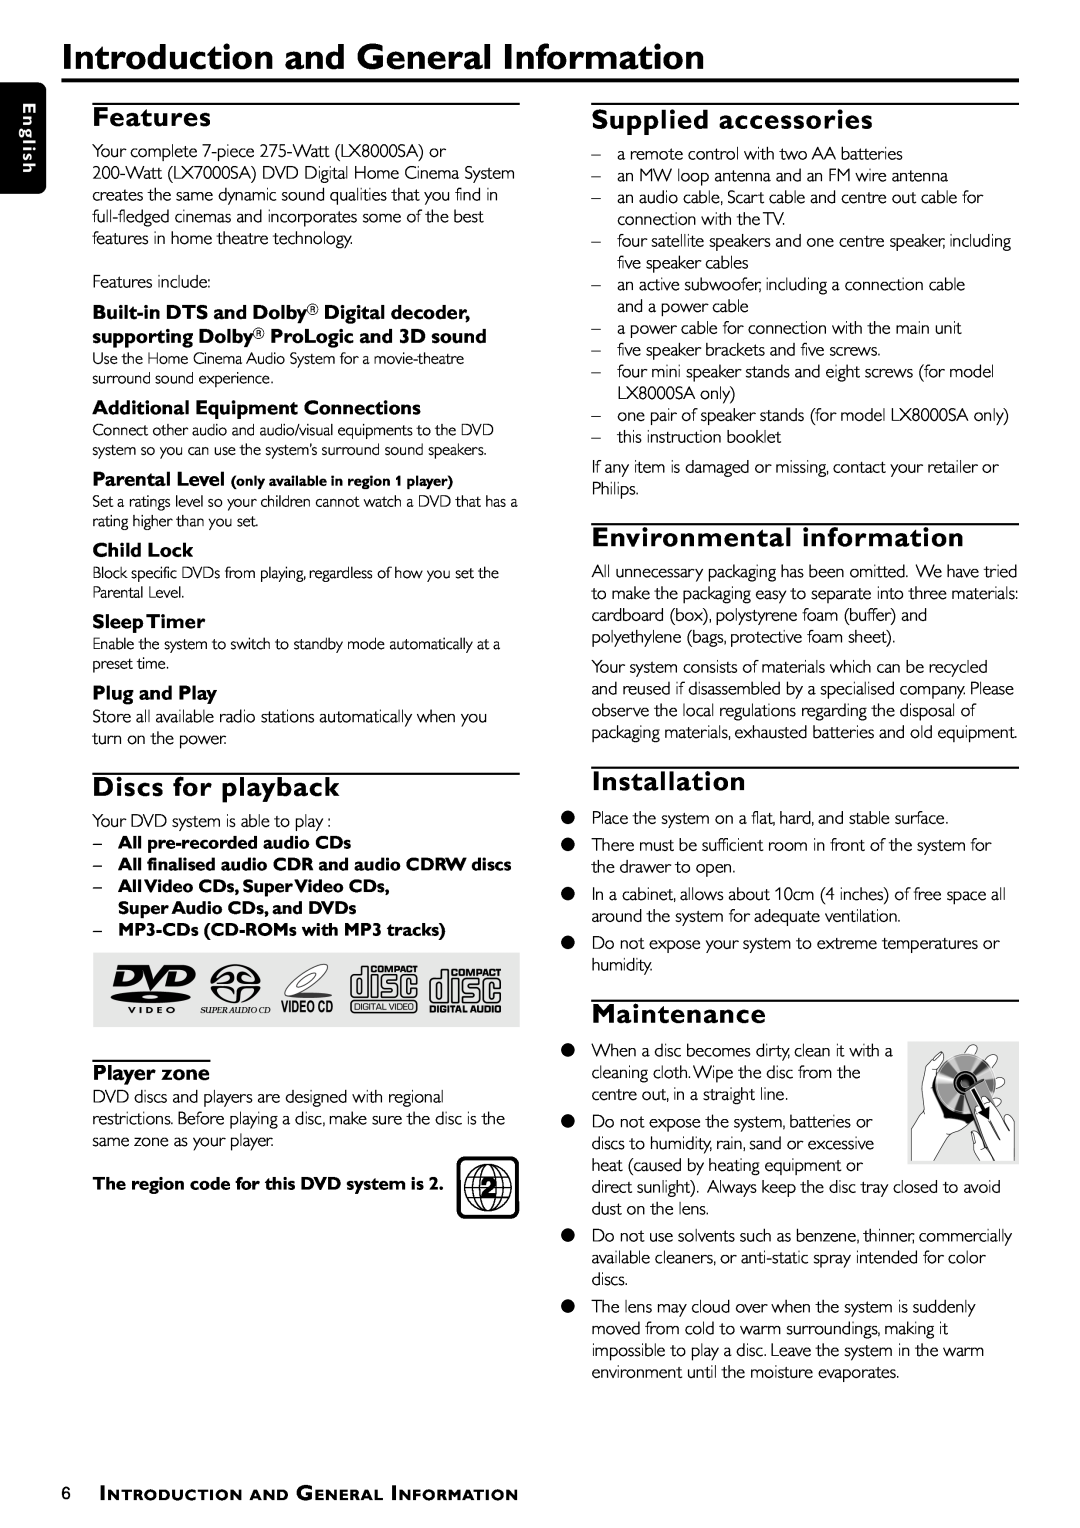 Philips LX8000SA manual Introduction and General Information, Player zone, Additional Equipment Connections, Child Lock 